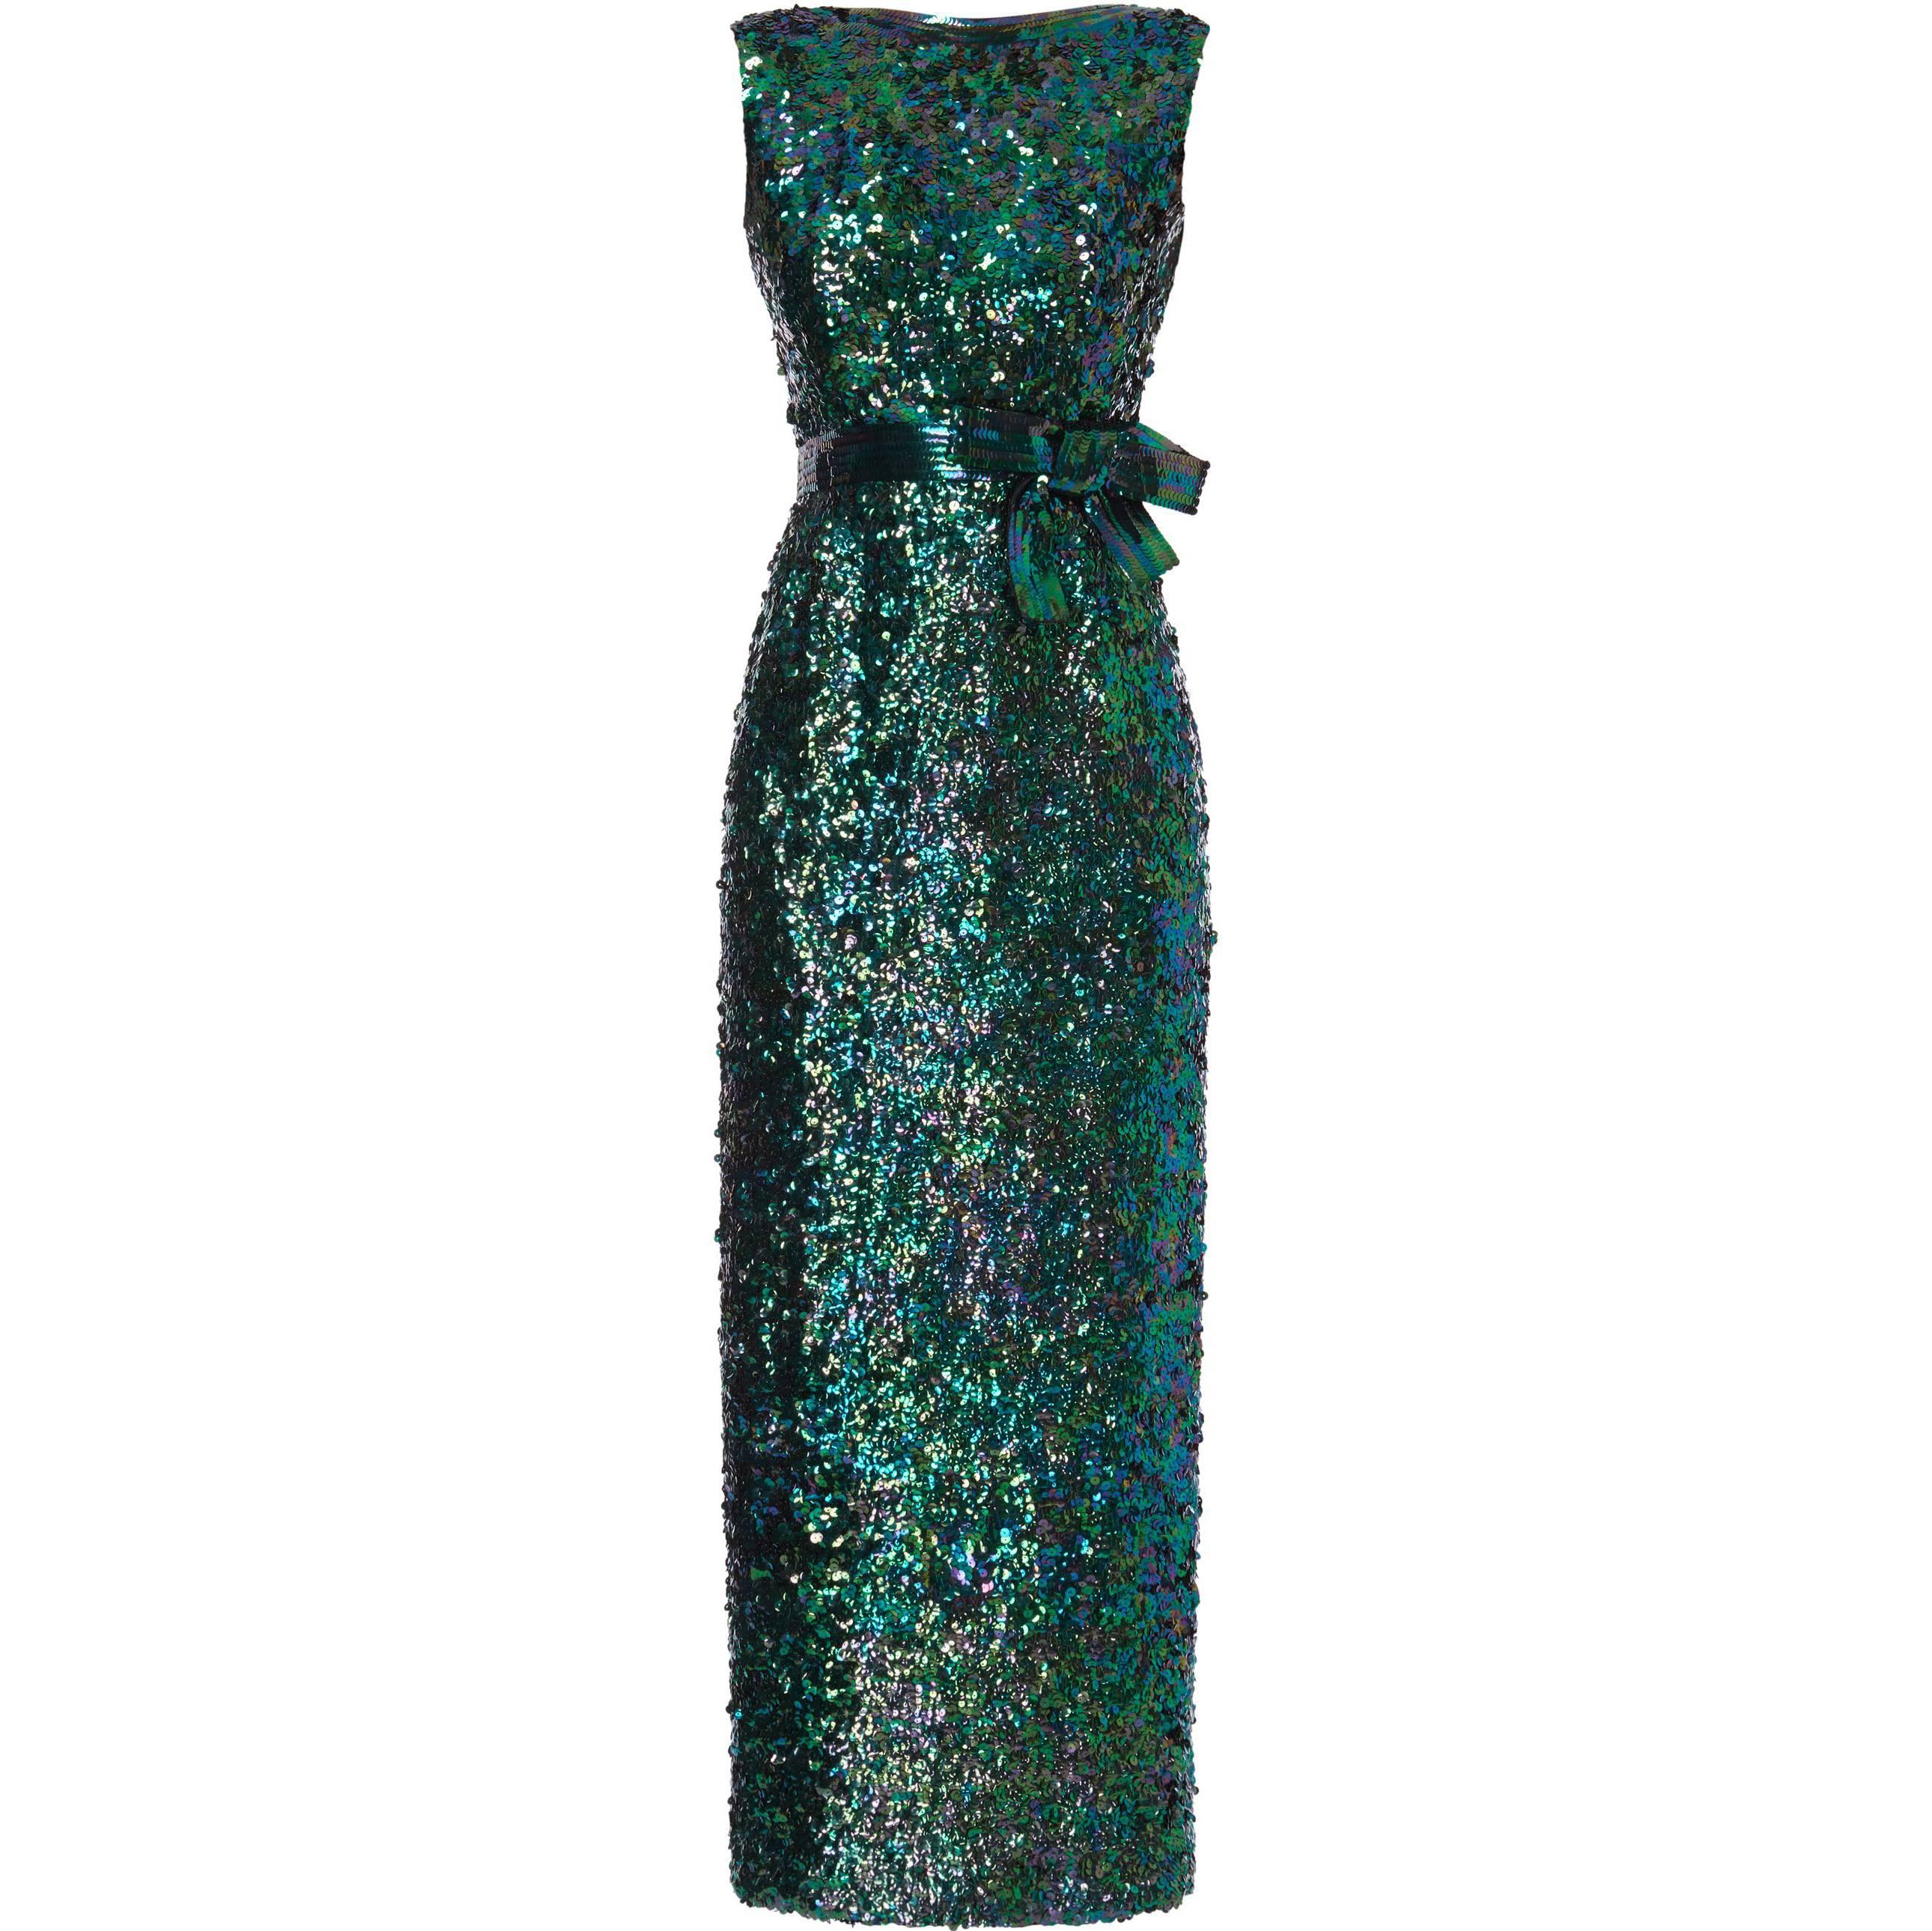 Norman norell Green mermaid evening gown with bow detail, circa 1965